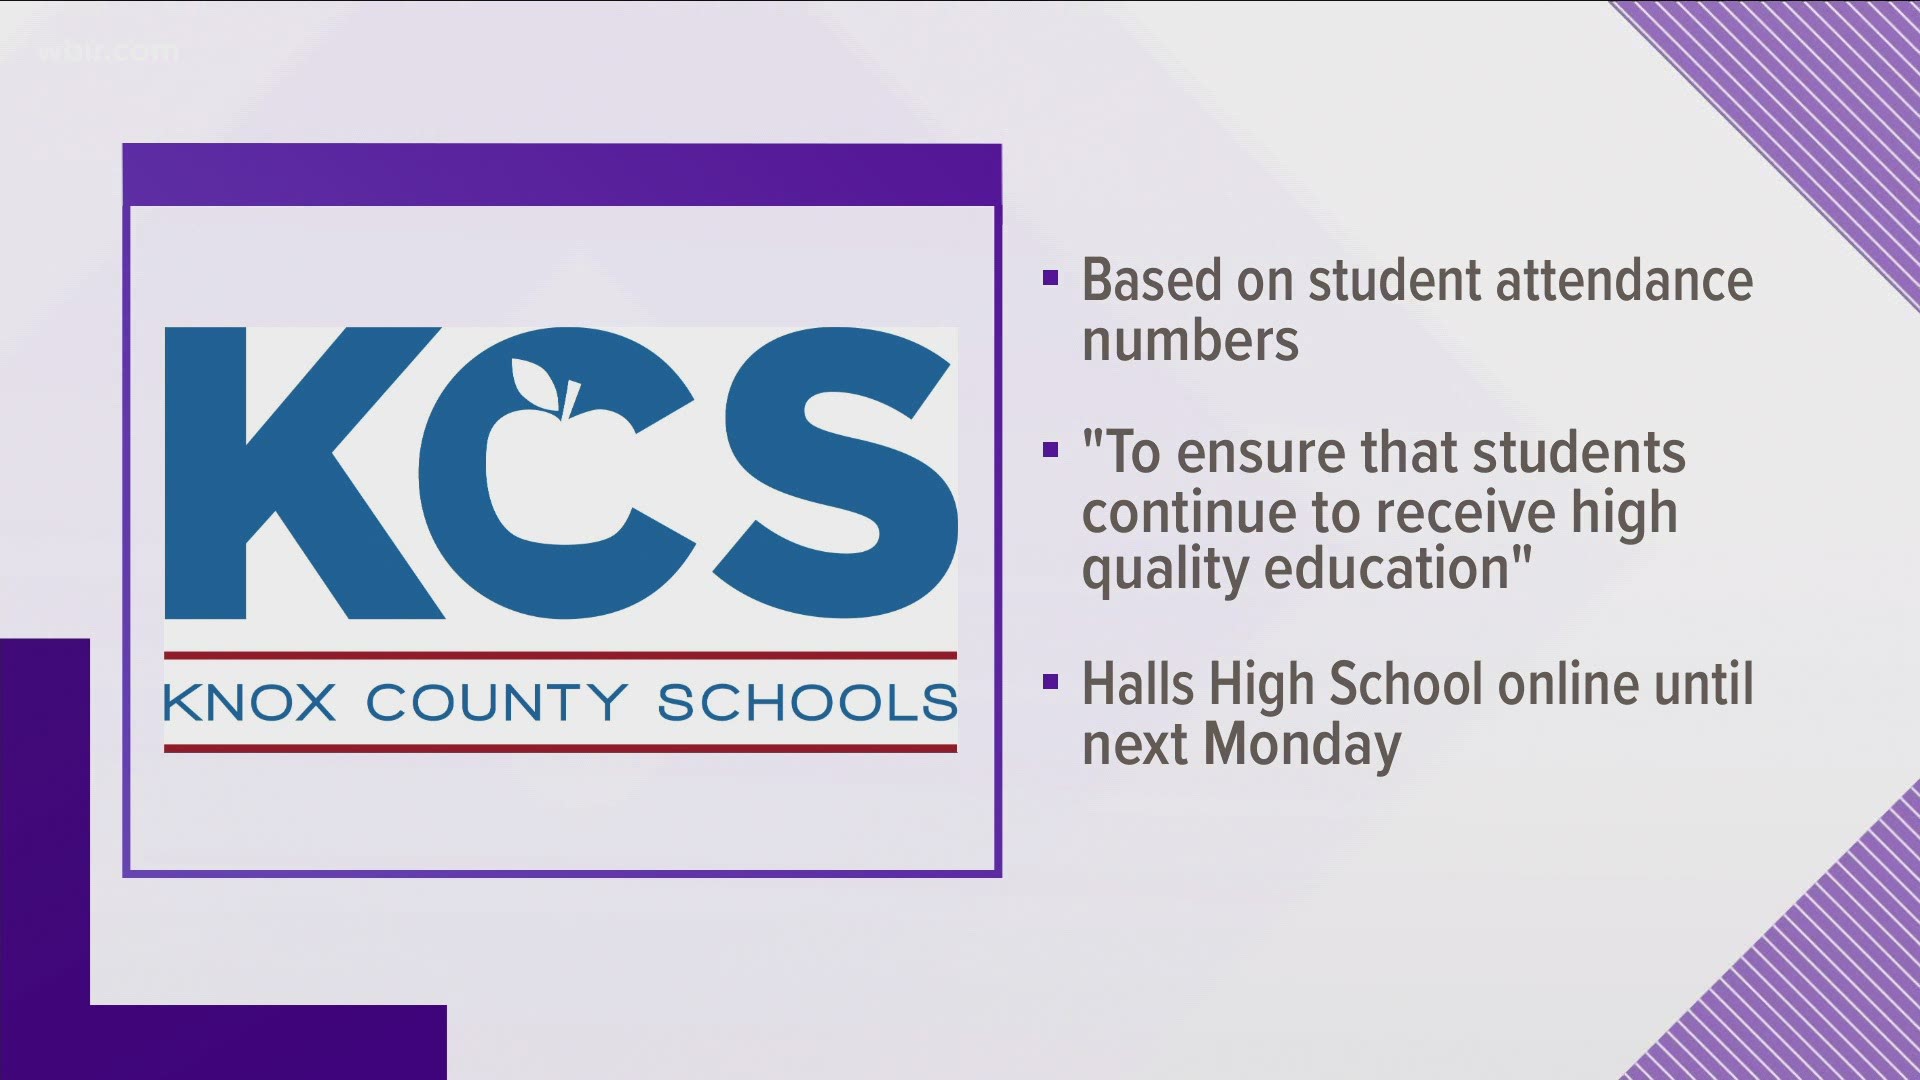 Knox County Schools says that's based on student attendance numbers.